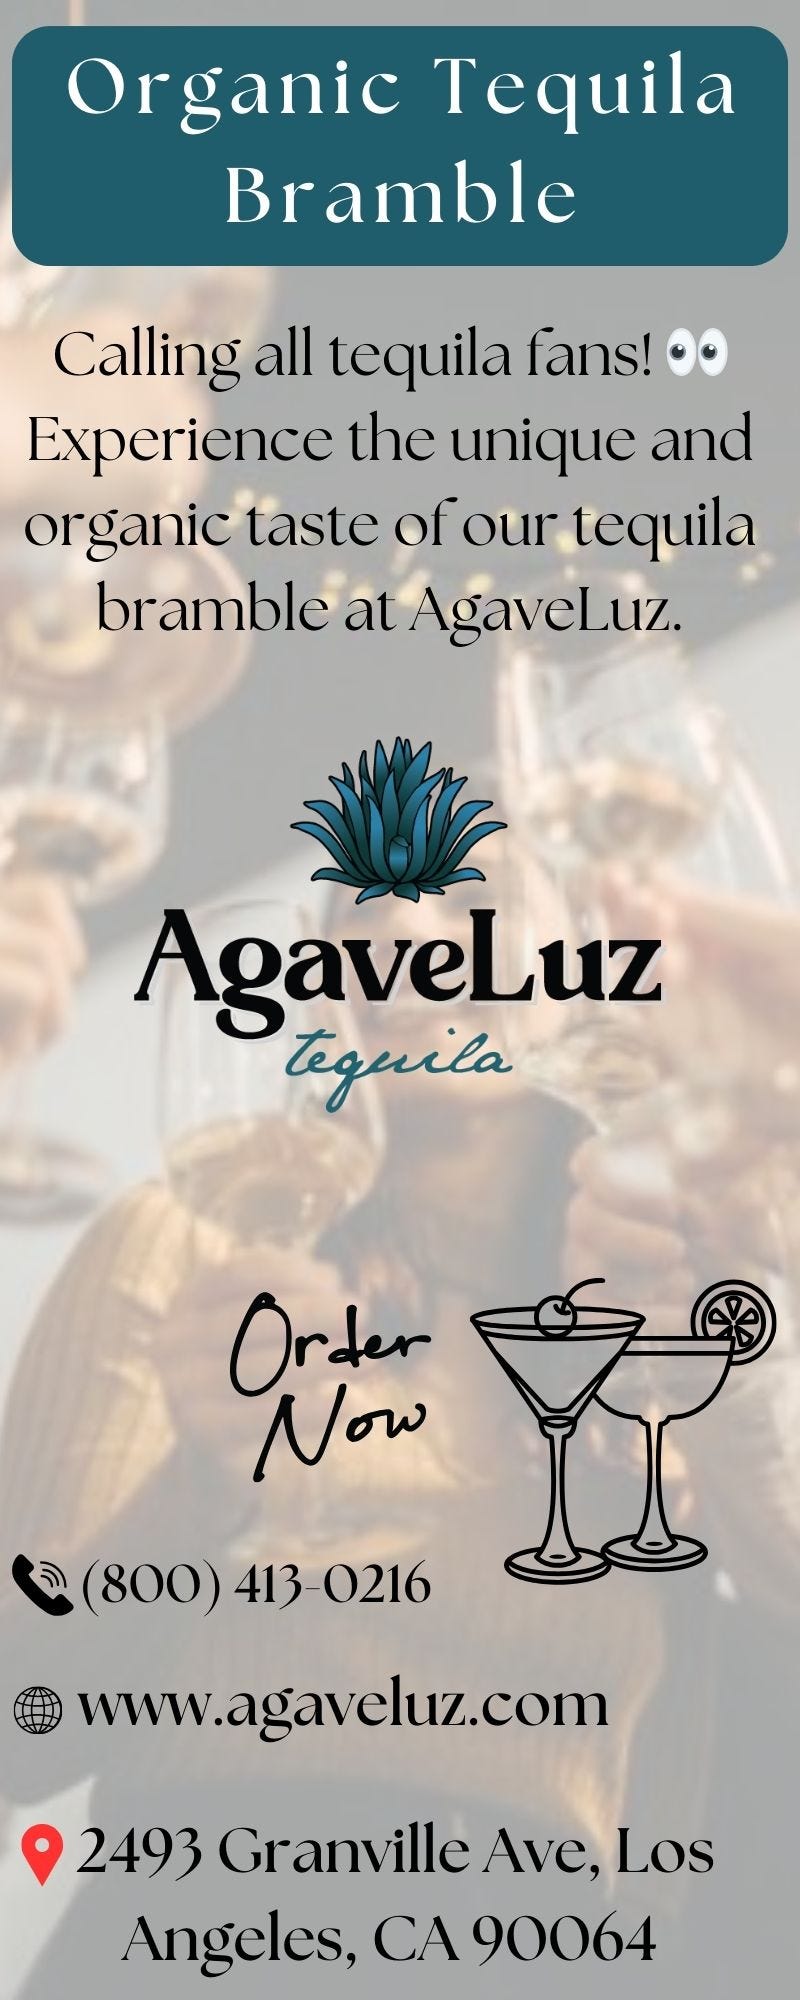 AgaveLuz Tequila | Crafting Exceptional Organic Tequila Bramble For The ...